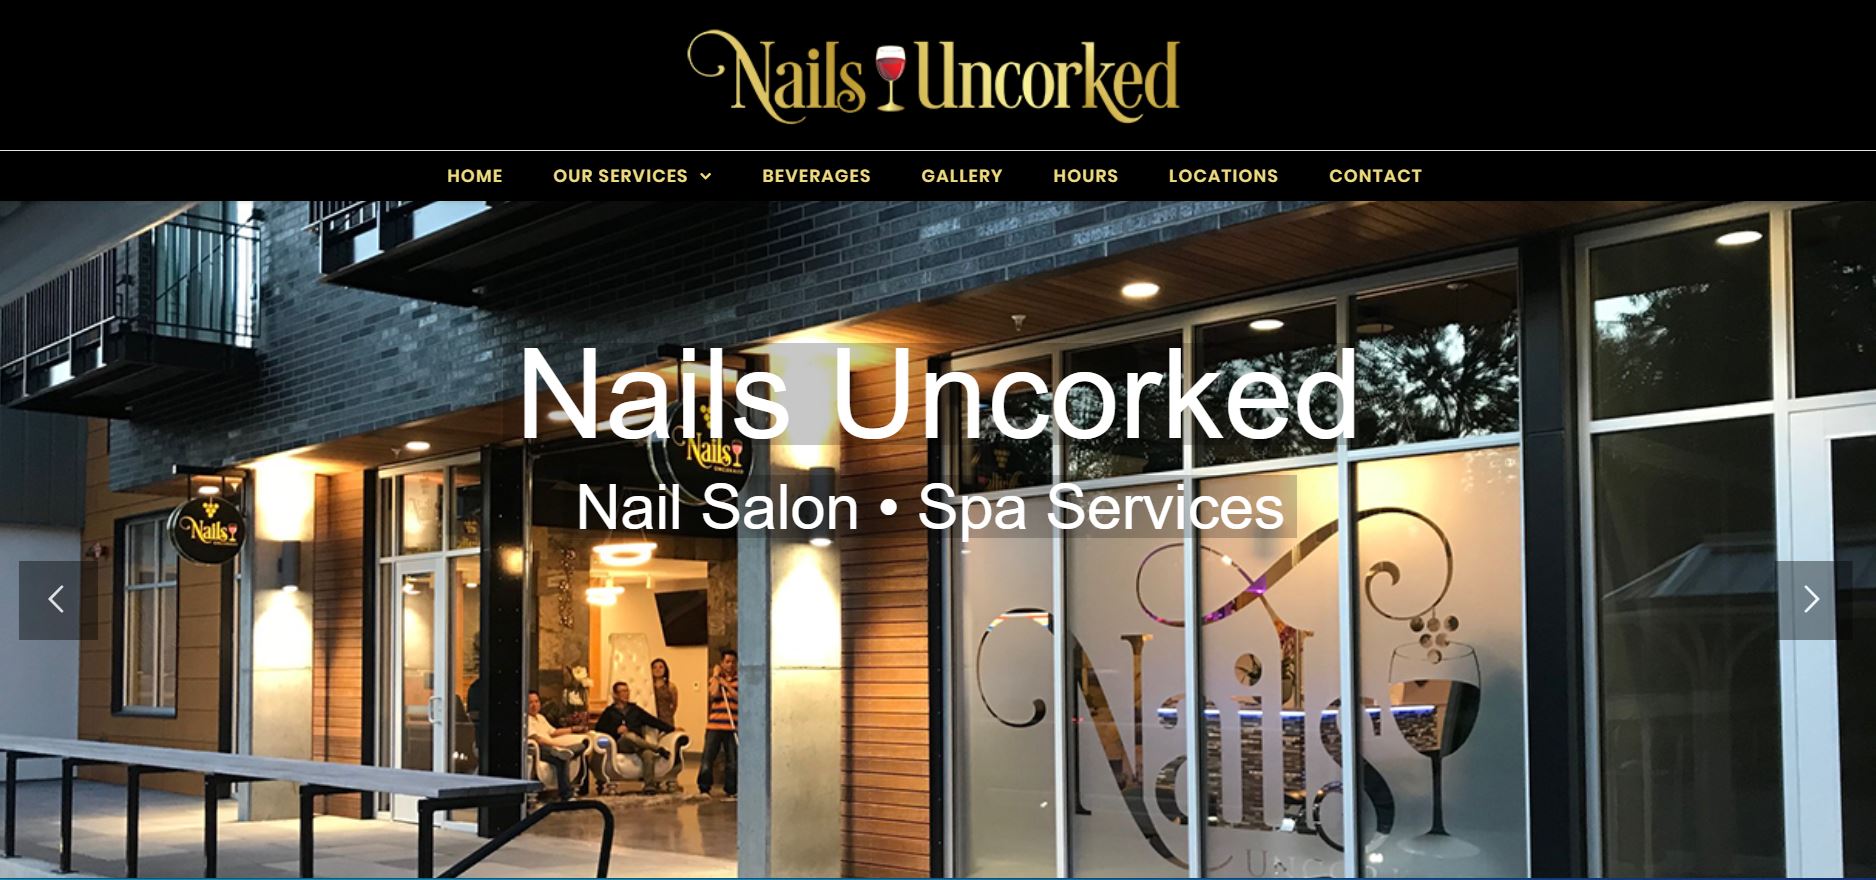 Nails Uncorked designed by JH Web Design